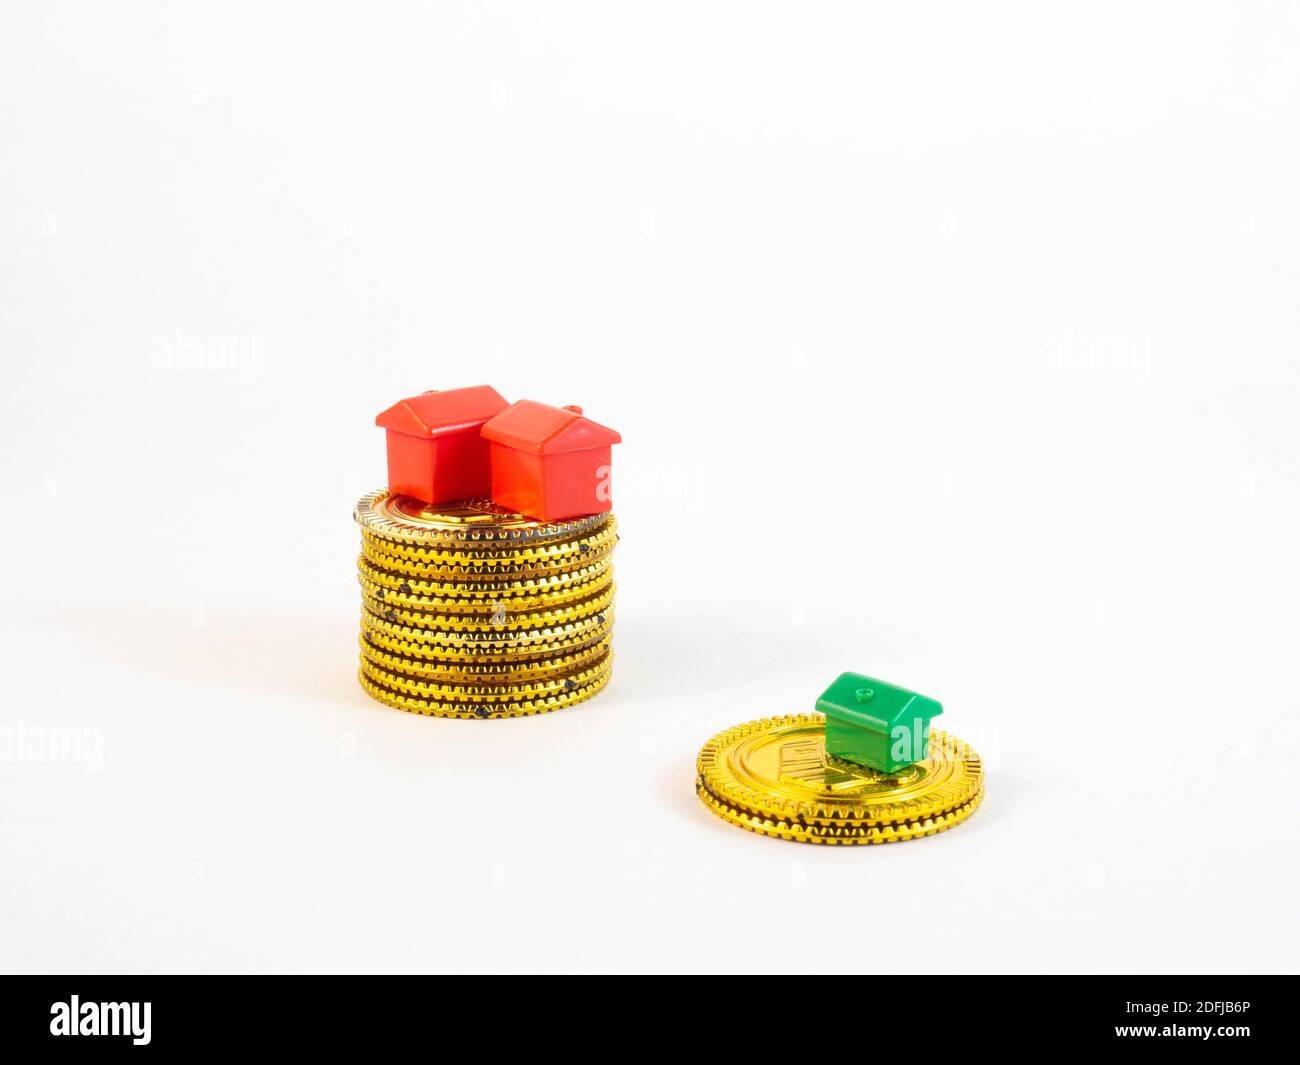 A gradient of a stack of coins, with mini houses in red colors on the larger stack and a green house on the smaller stack. Concept around real estate, Stock Photo